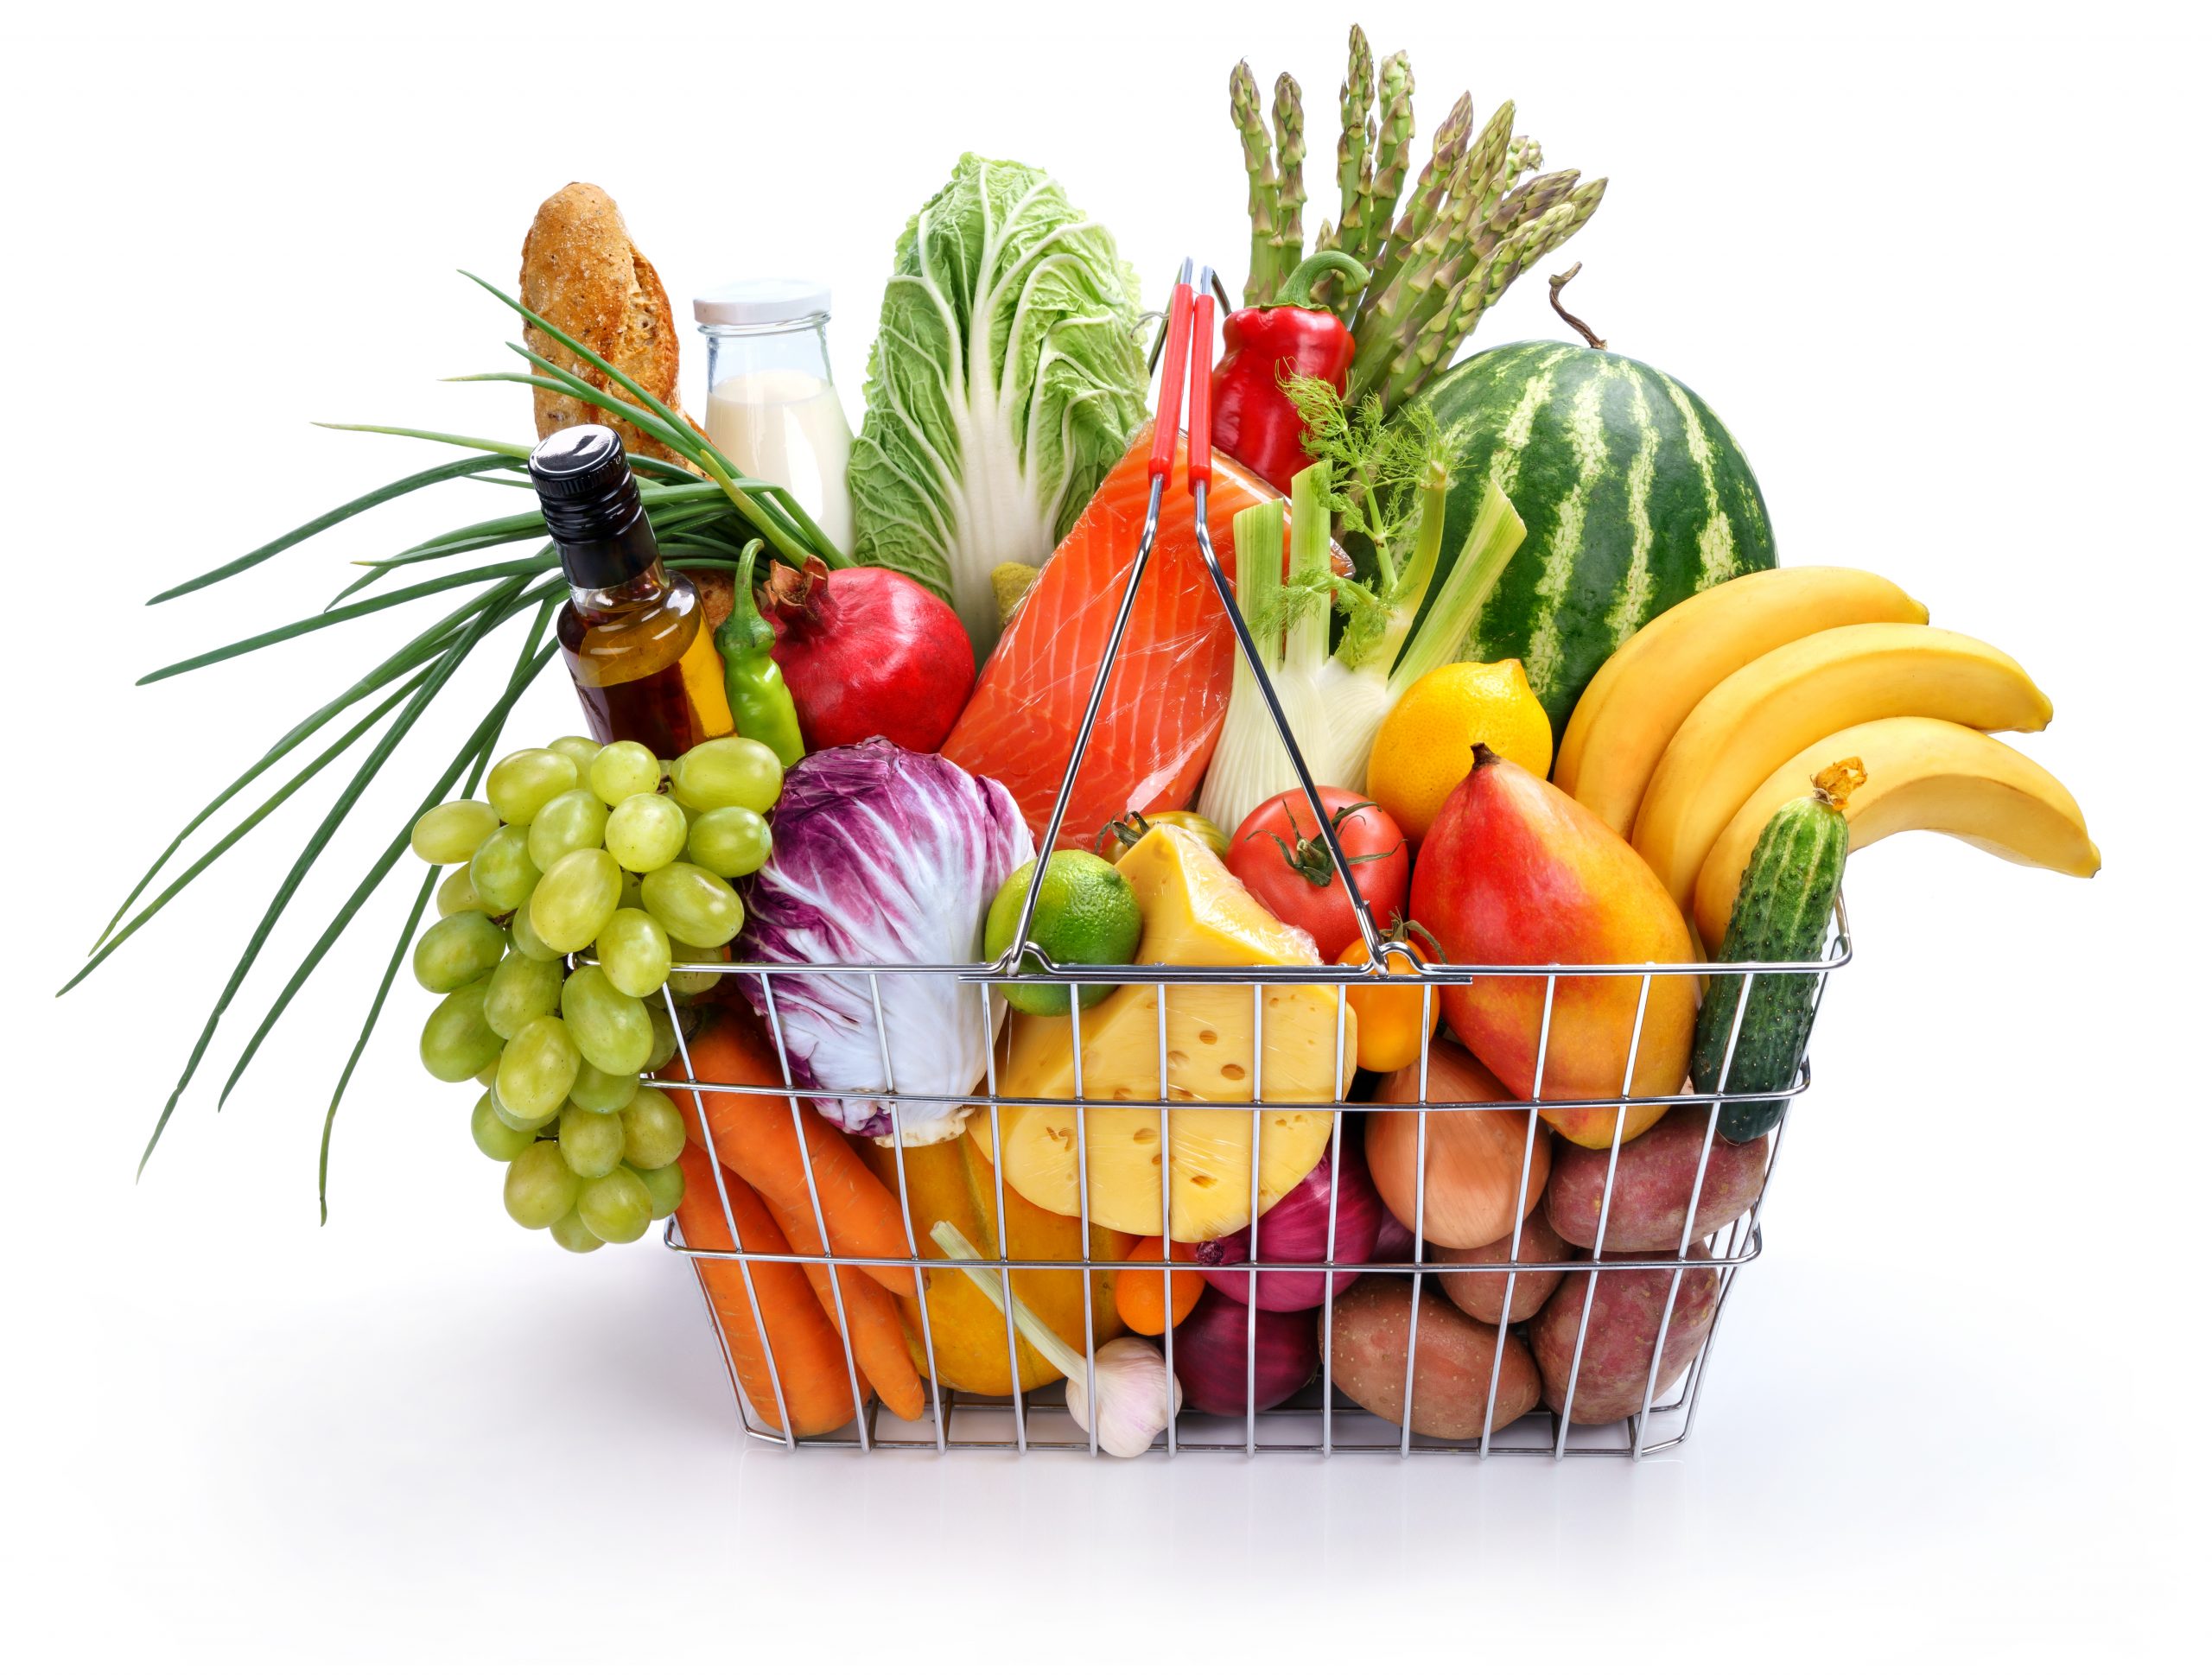 Kantar latest quarterly figures show home grocery sales rose by 7.4%